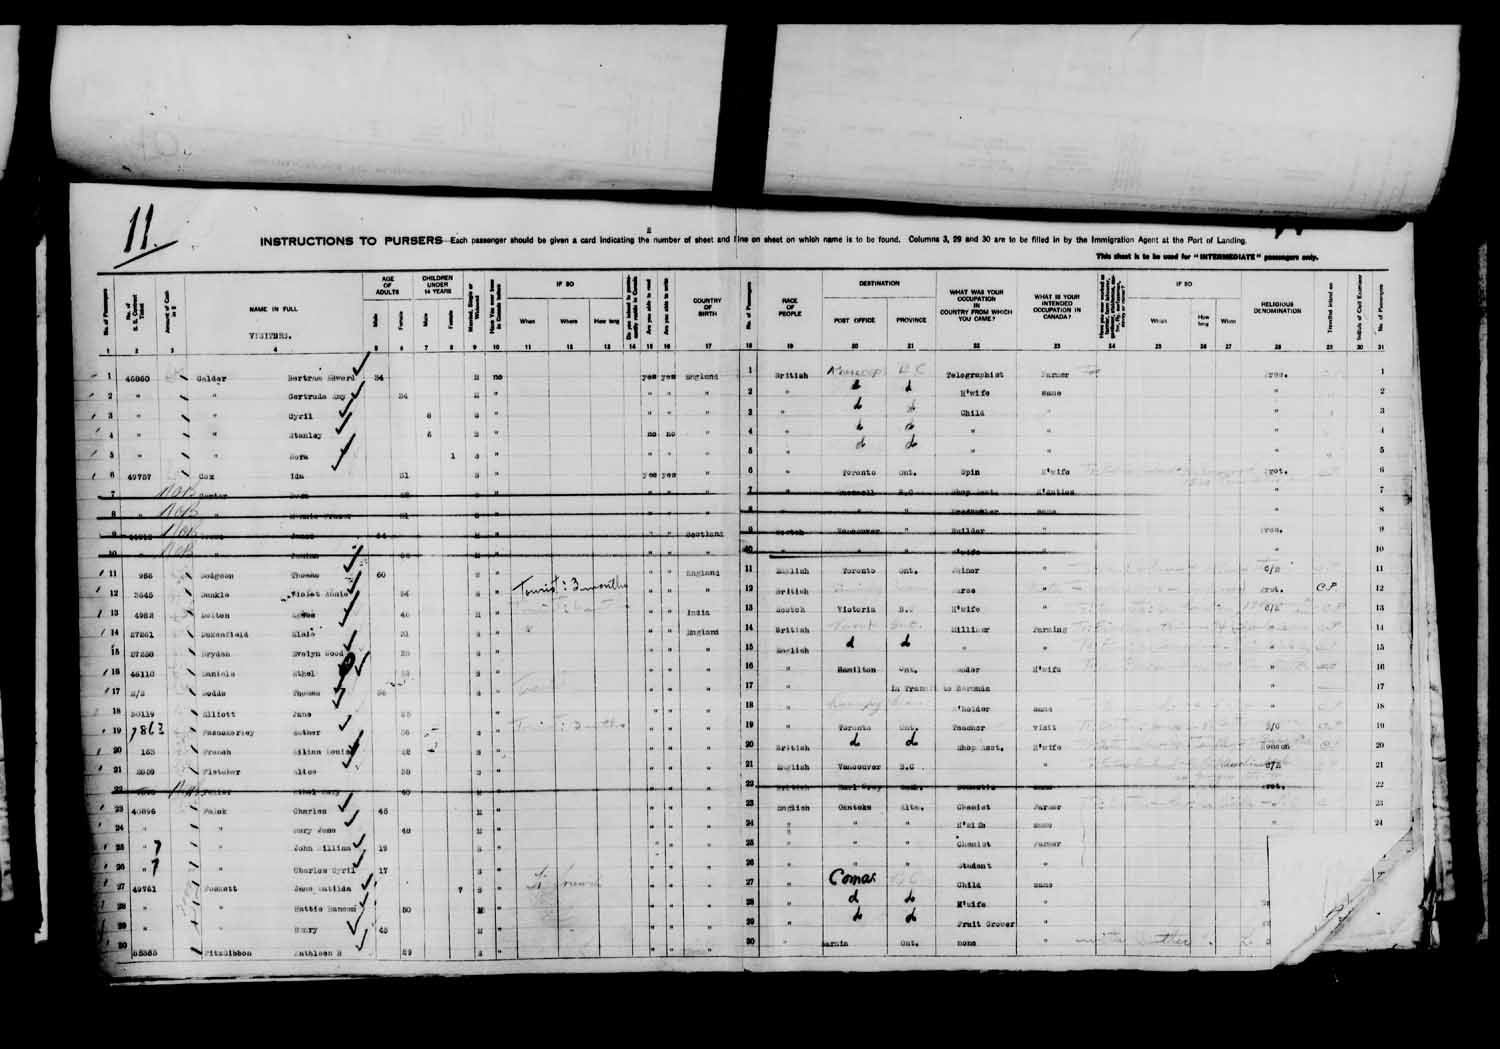 Digitized page of Passenger Lists for Image No.: e003610618